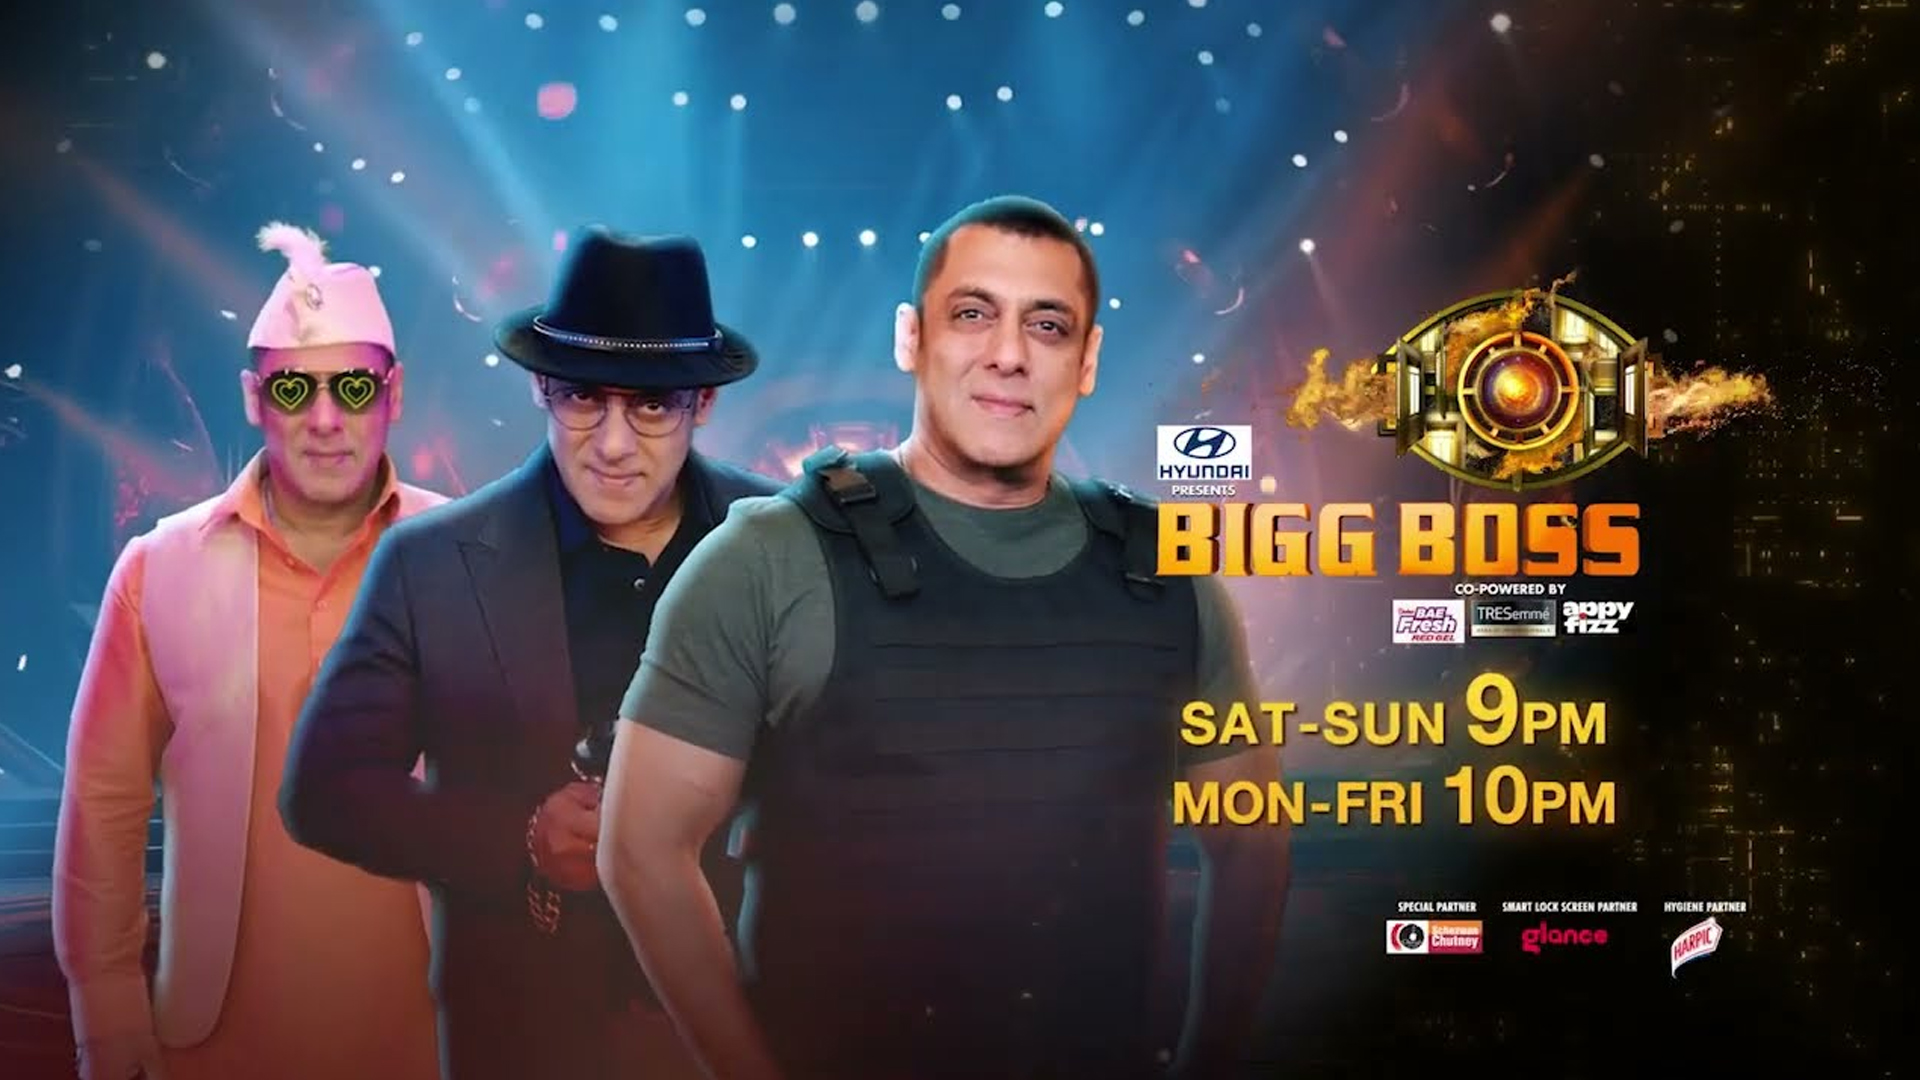 Hey Salman Khan fans! Here’s your chance to meet the superstar at the BIGG BOSS House